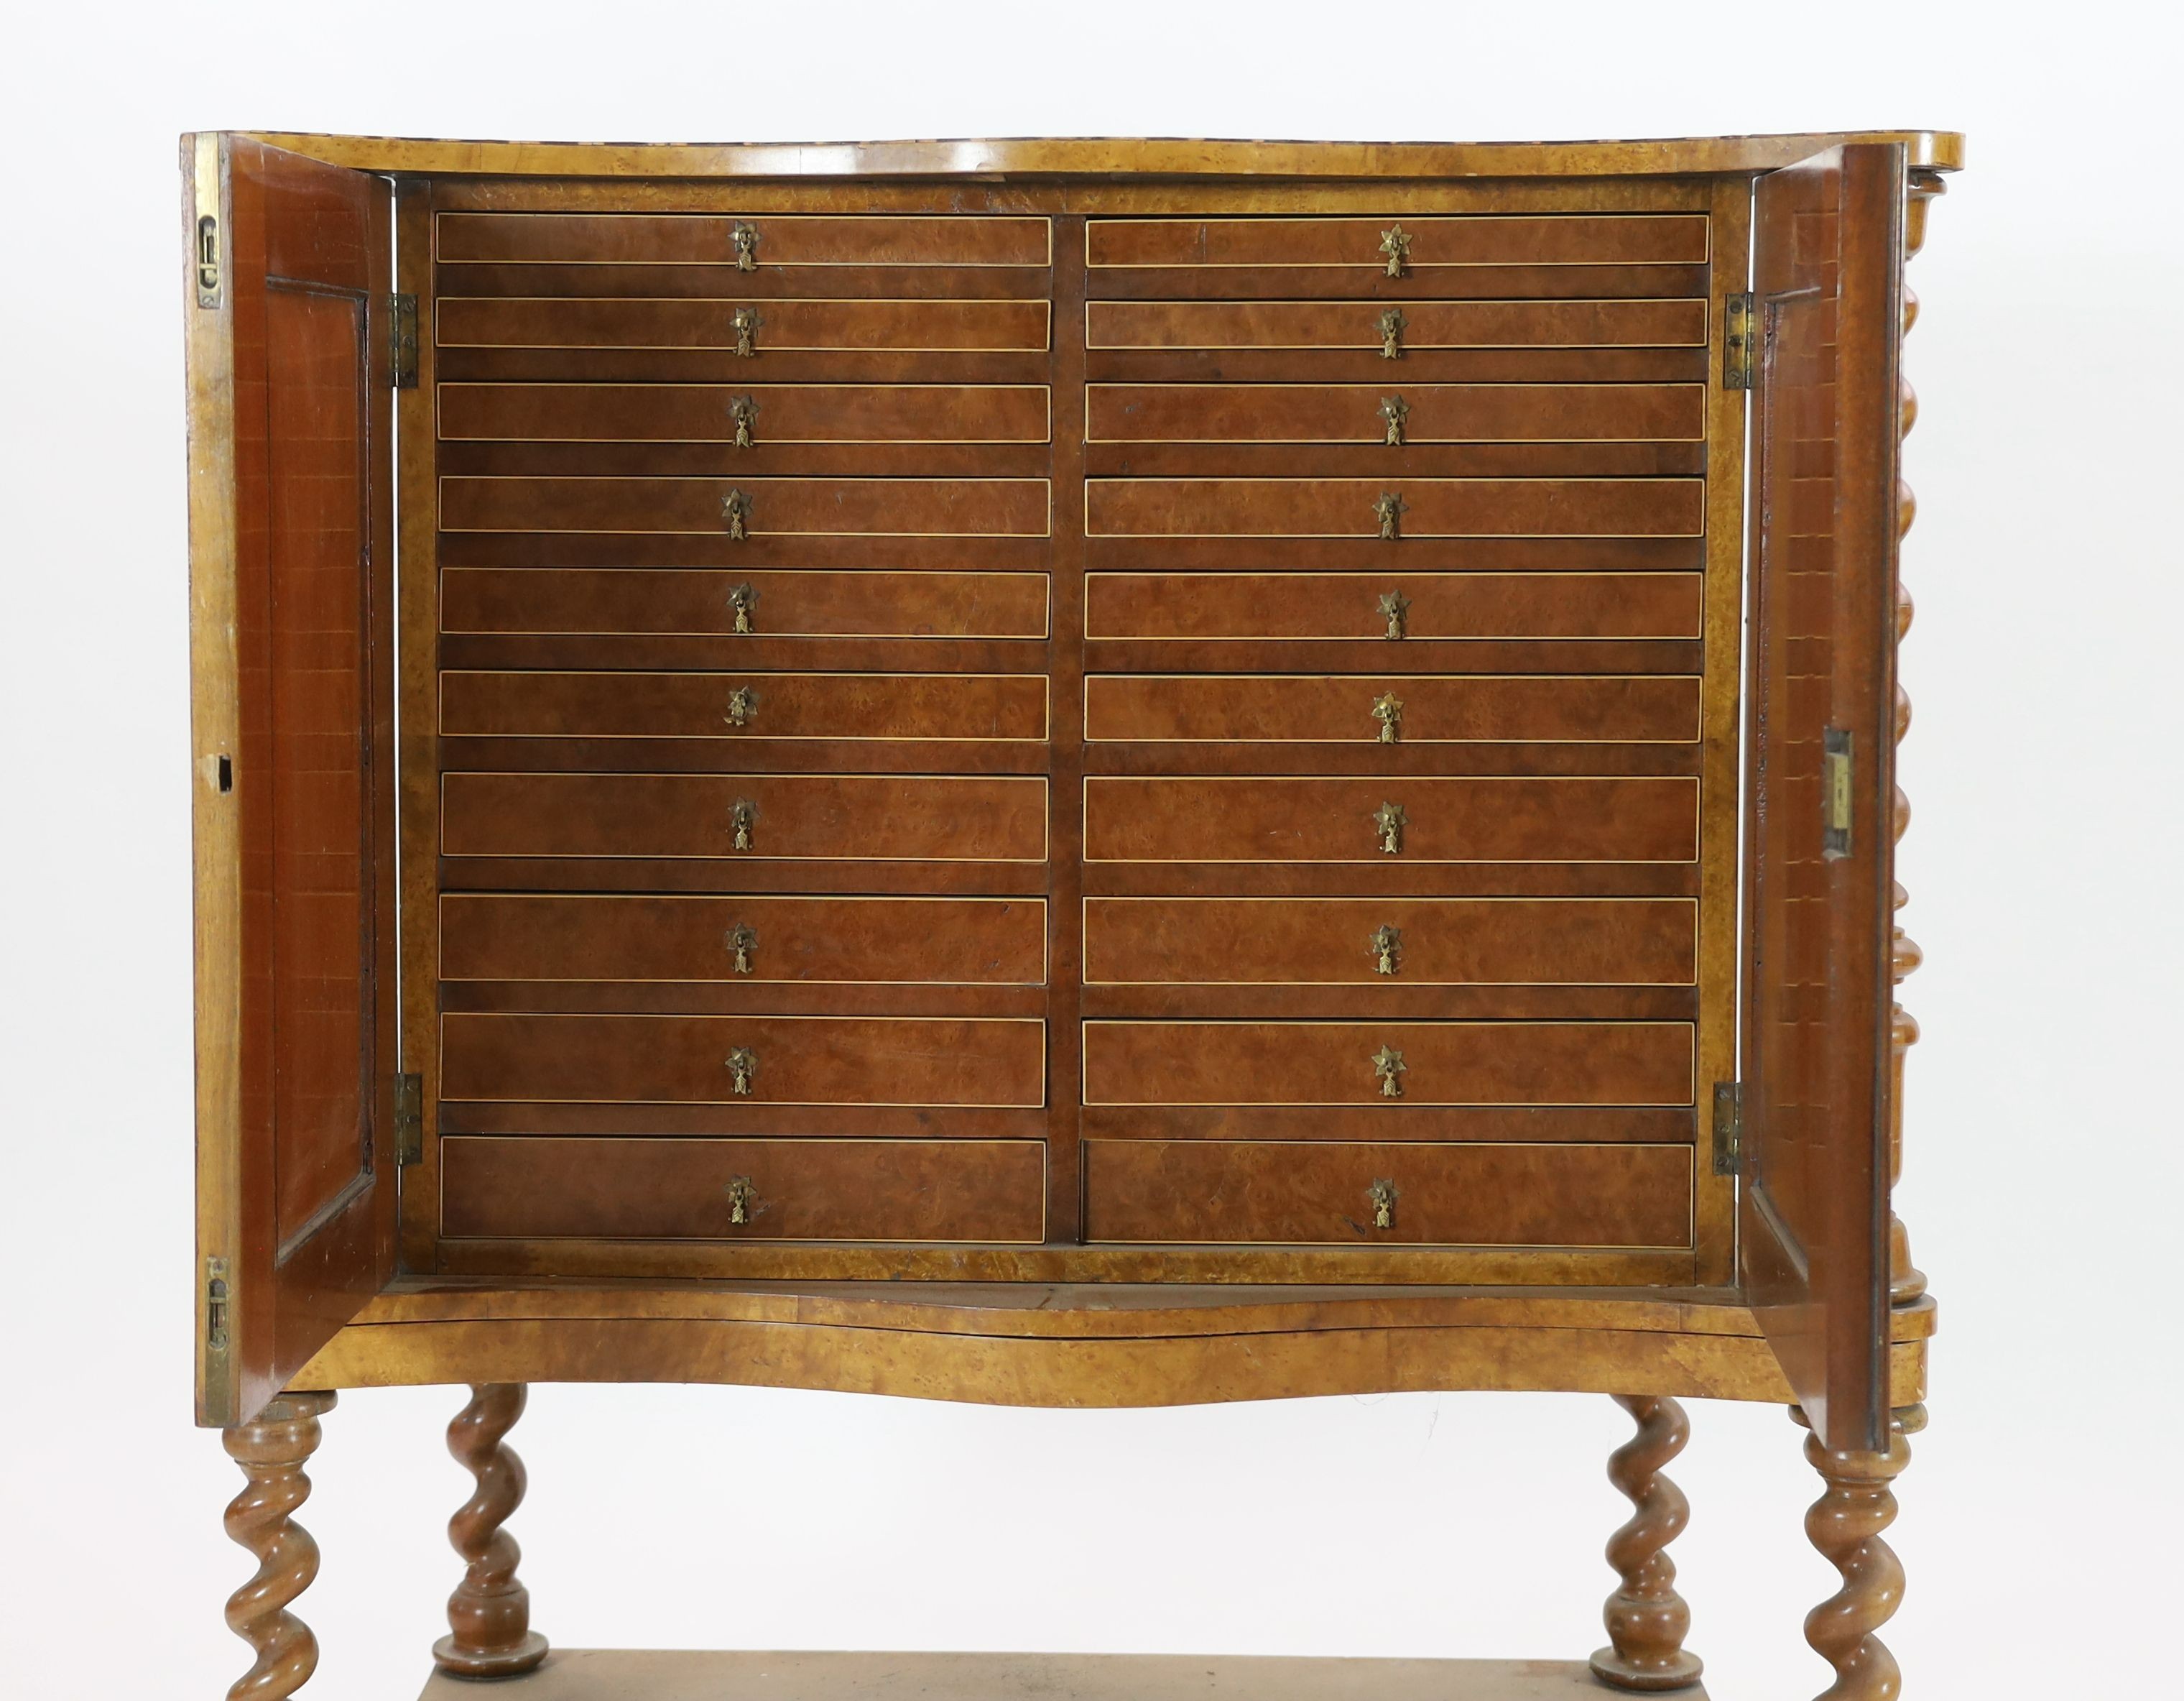 A 19th century Irish yew wood, oyster veneered and burr wood serpentine collector's cabinet, W.118cm D.57cm H.128cm